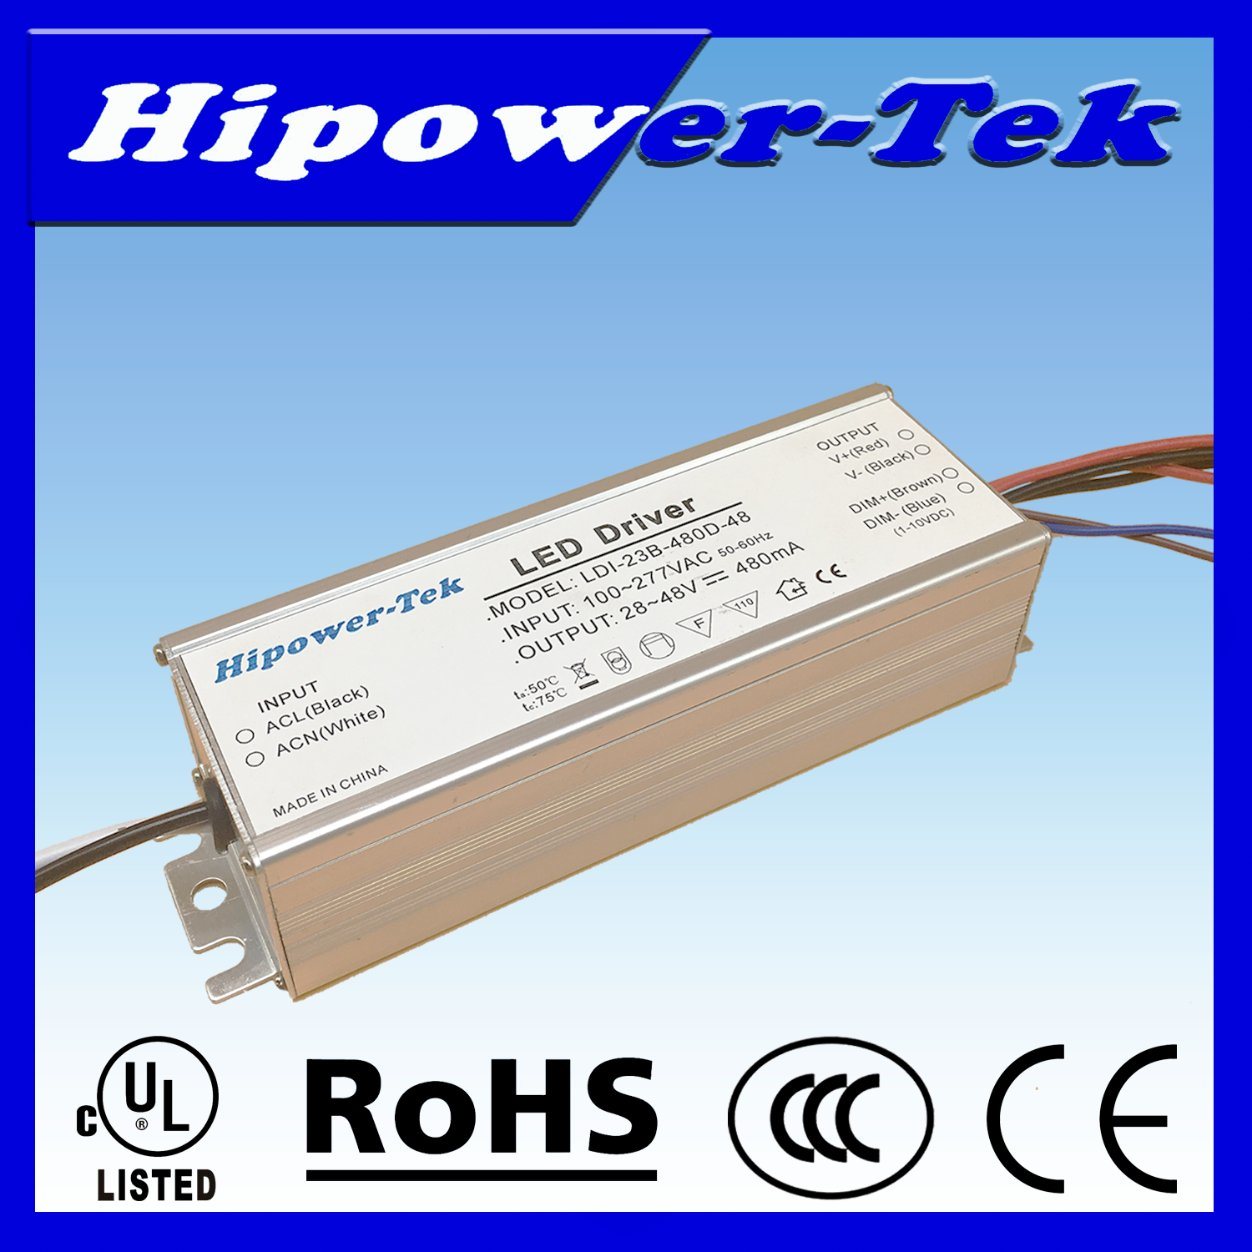 UL Listed 25W 820mA 30V Constant Current Short Case LED Power Supply